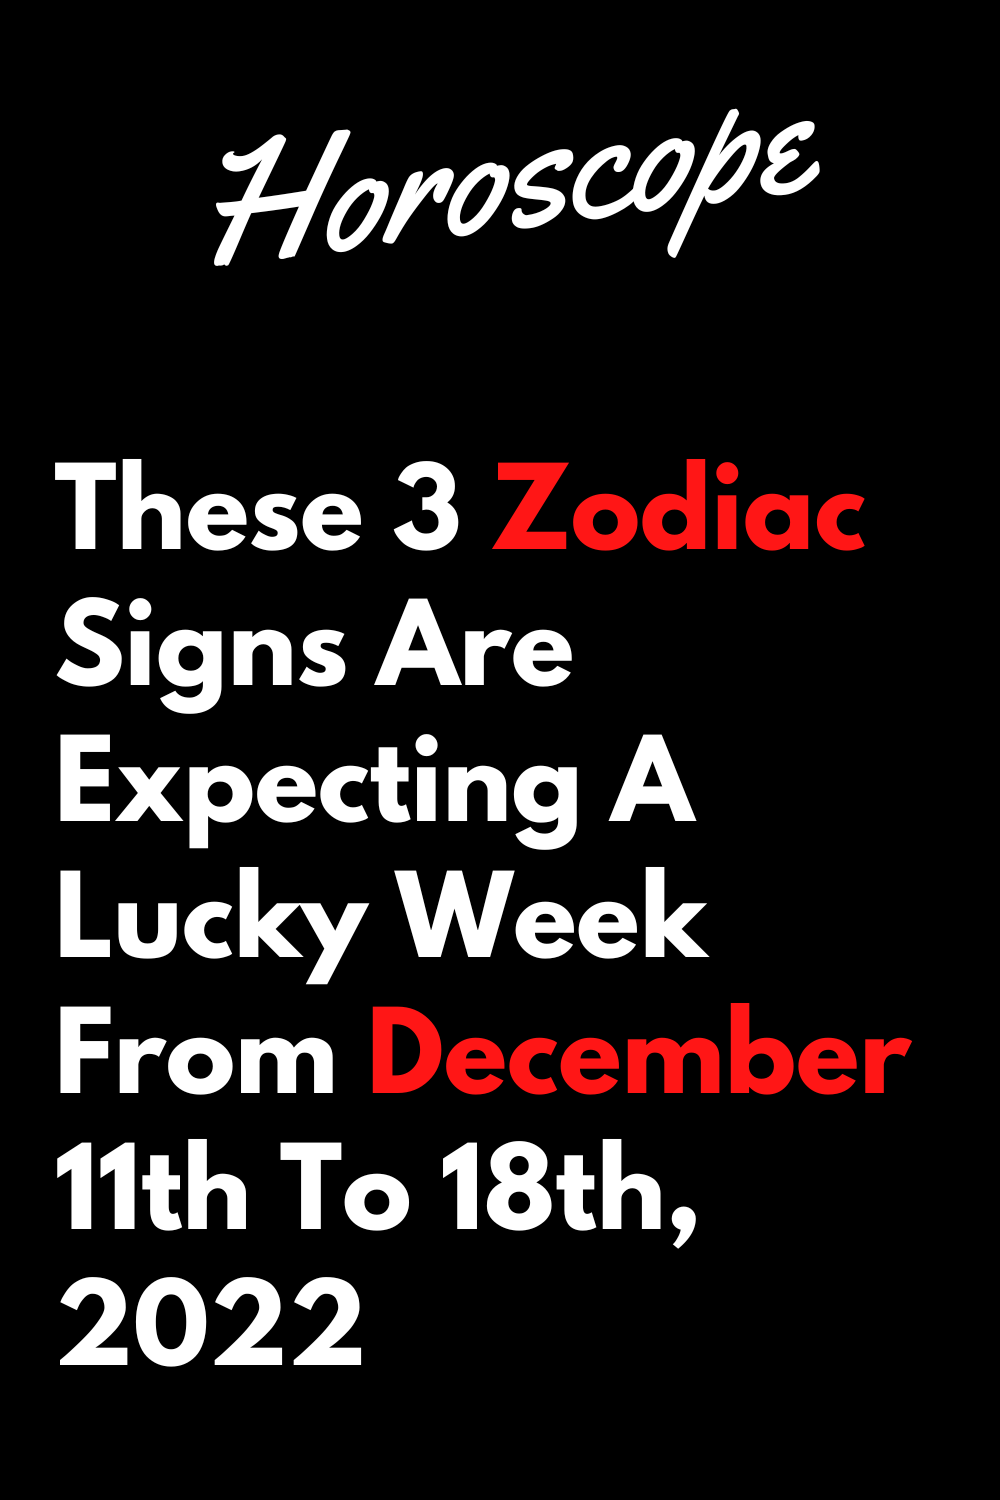 These 3 Zodiac Signs Are Expecting A Lucky Week From December 11th To ...